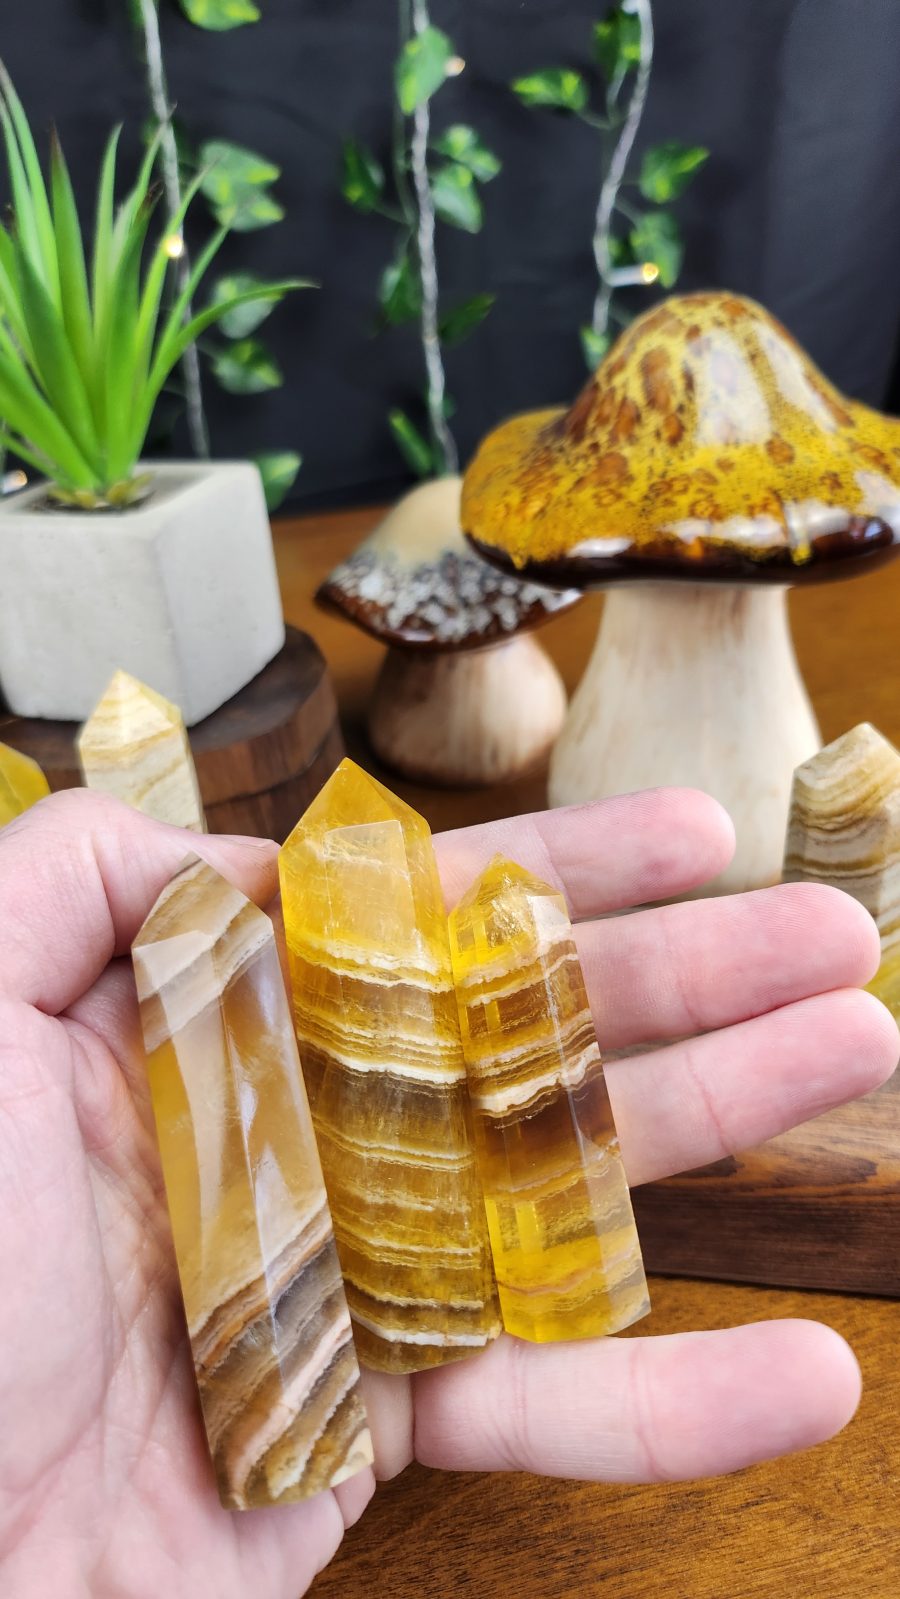 Yellow Fluorite crystal towers in hand to show size.